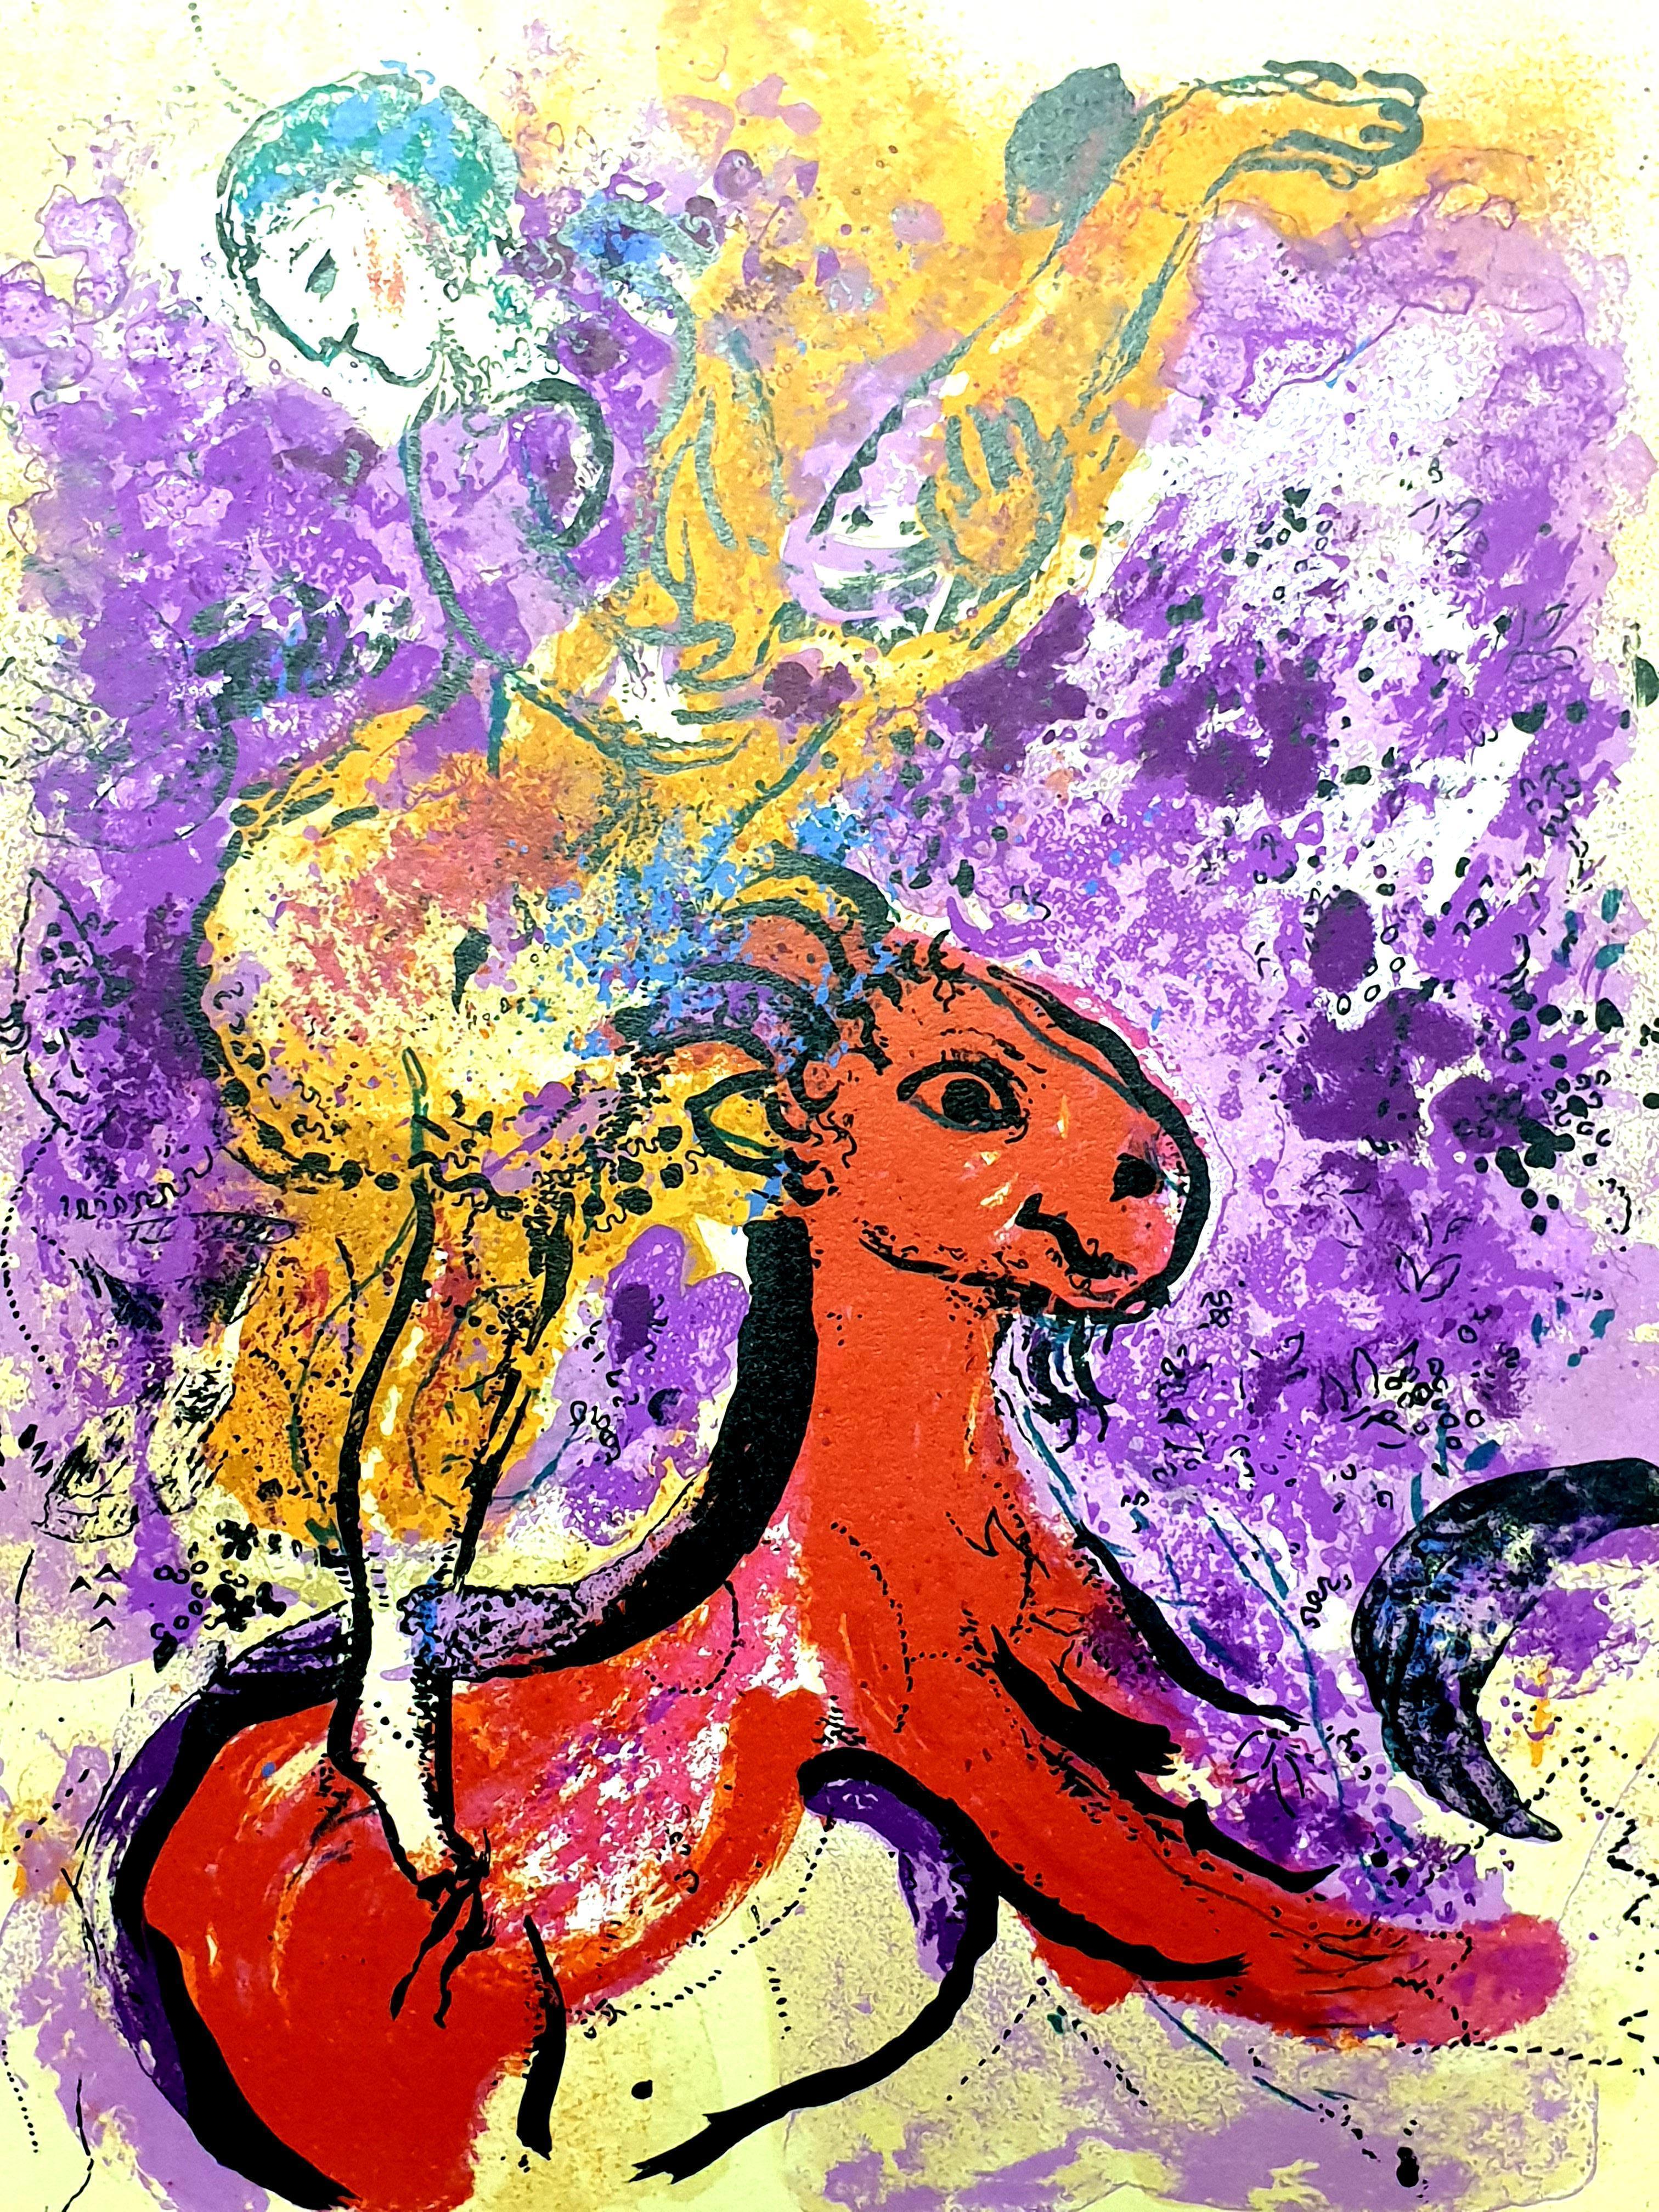 Marc Chagall - Original Lithograph
The Red Rider
From the literary review "XXe Siècle"
1957
Mourlot 191
Dimensions: 32 x 24 cm 
Publisher: G. di San Lazzaro.

Marc Chagall  (born in 1887)

Marc Chagall was born in Belarus in 1887 and developed an